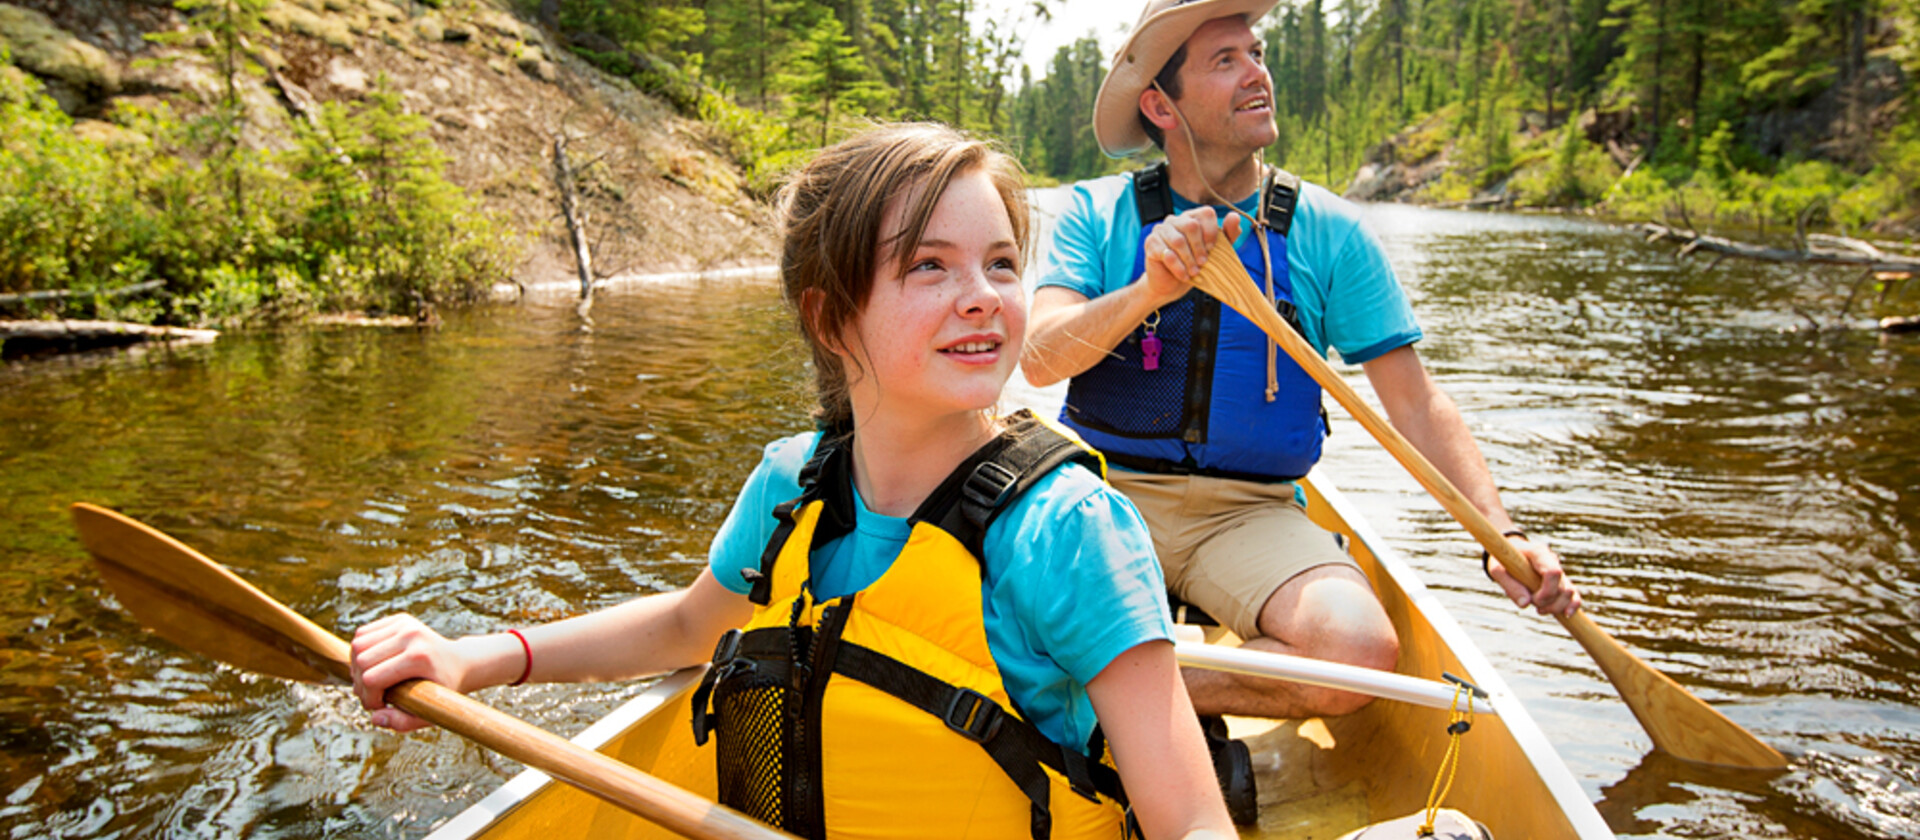 Thunder Bay: Your Urban Base for Epic Summer Family Fun in Canada's ...